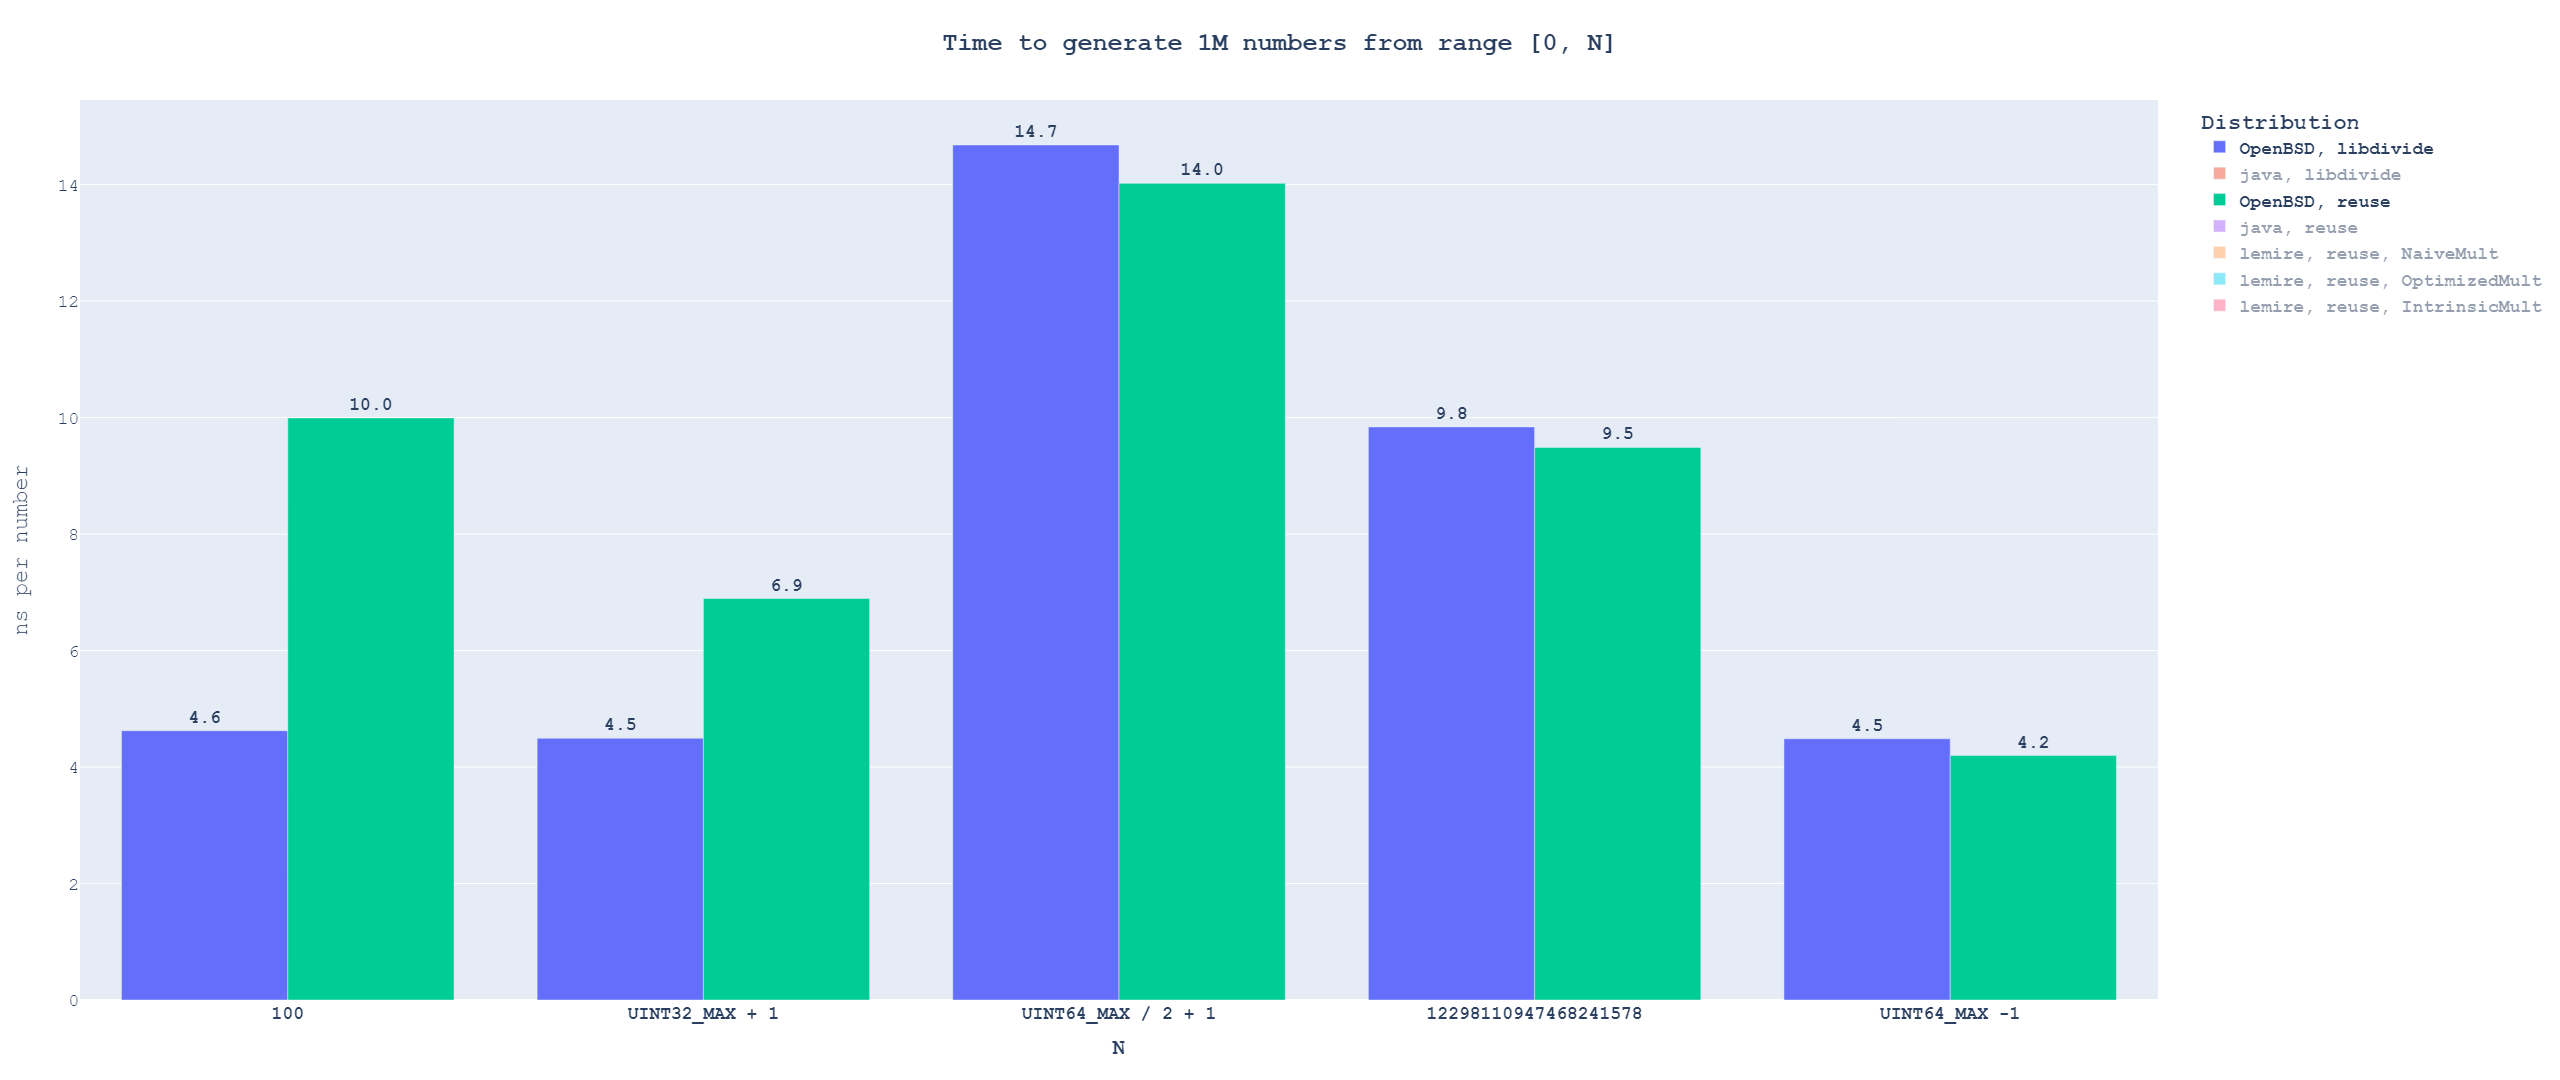 Bar graph with the time to generate many numbers from single distributions, OpenBSD with HW division vs OpenBSD with libdivide